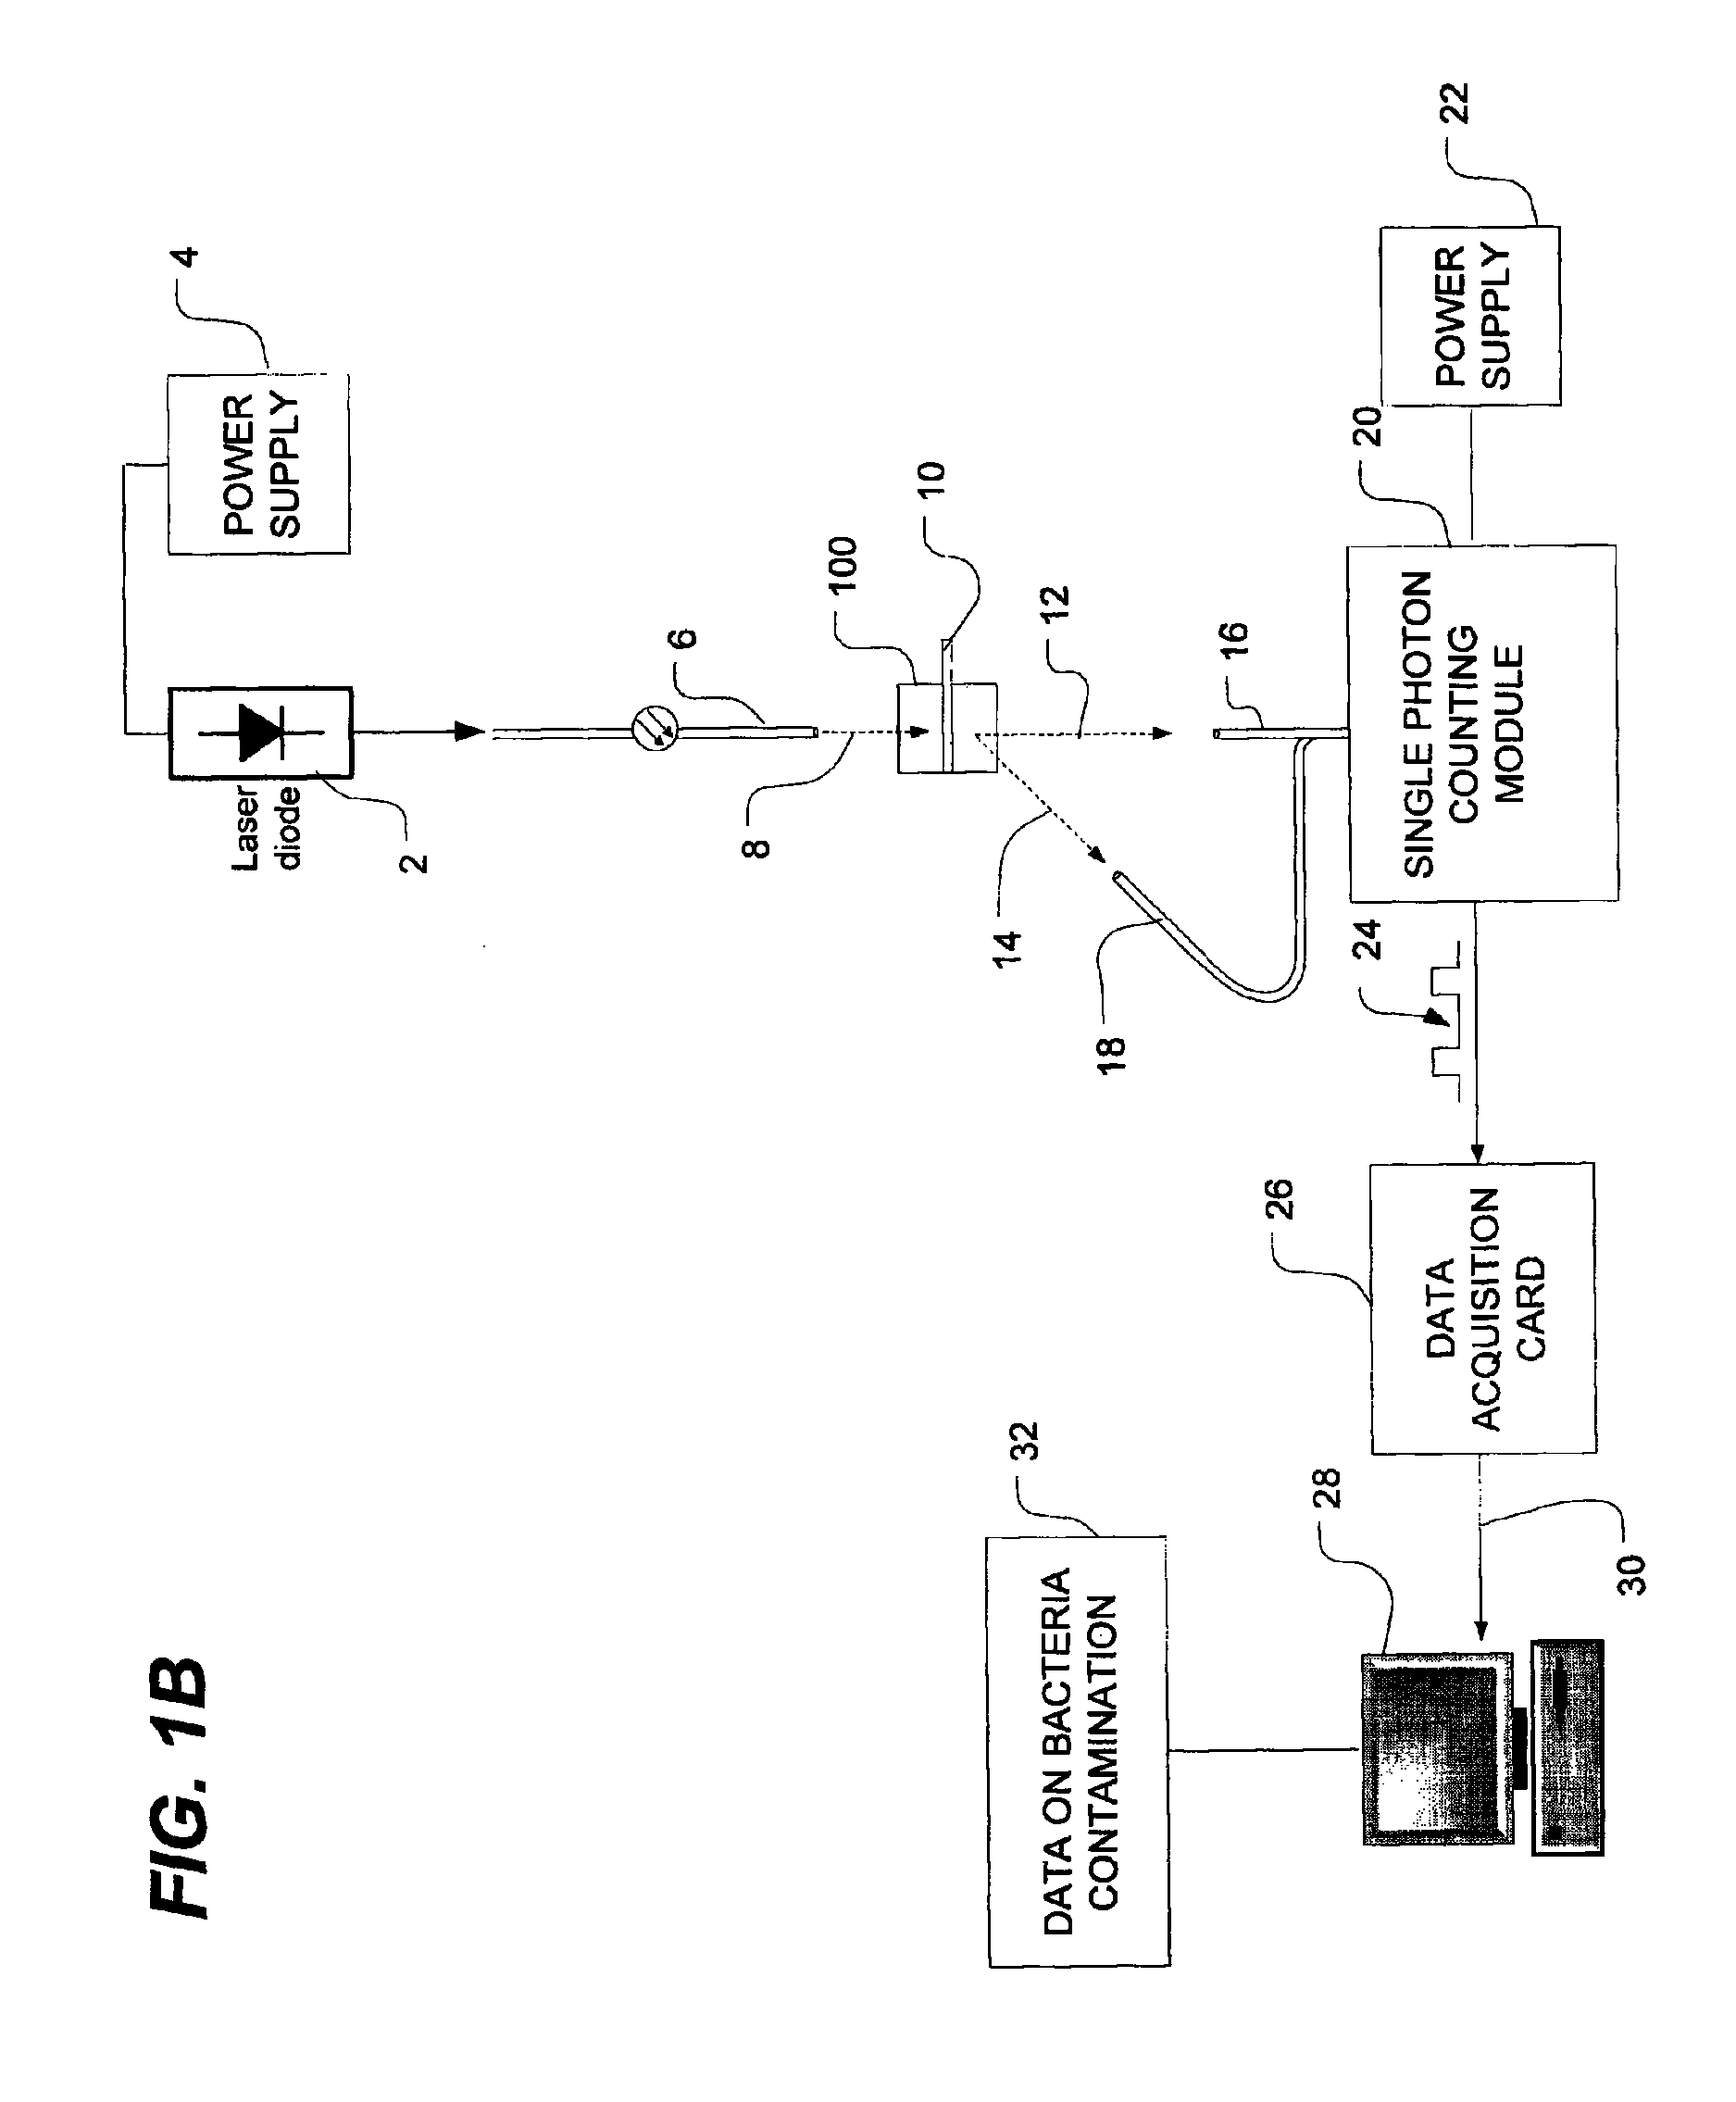 Method of detecting bacterial contamination using dynamic light scattering